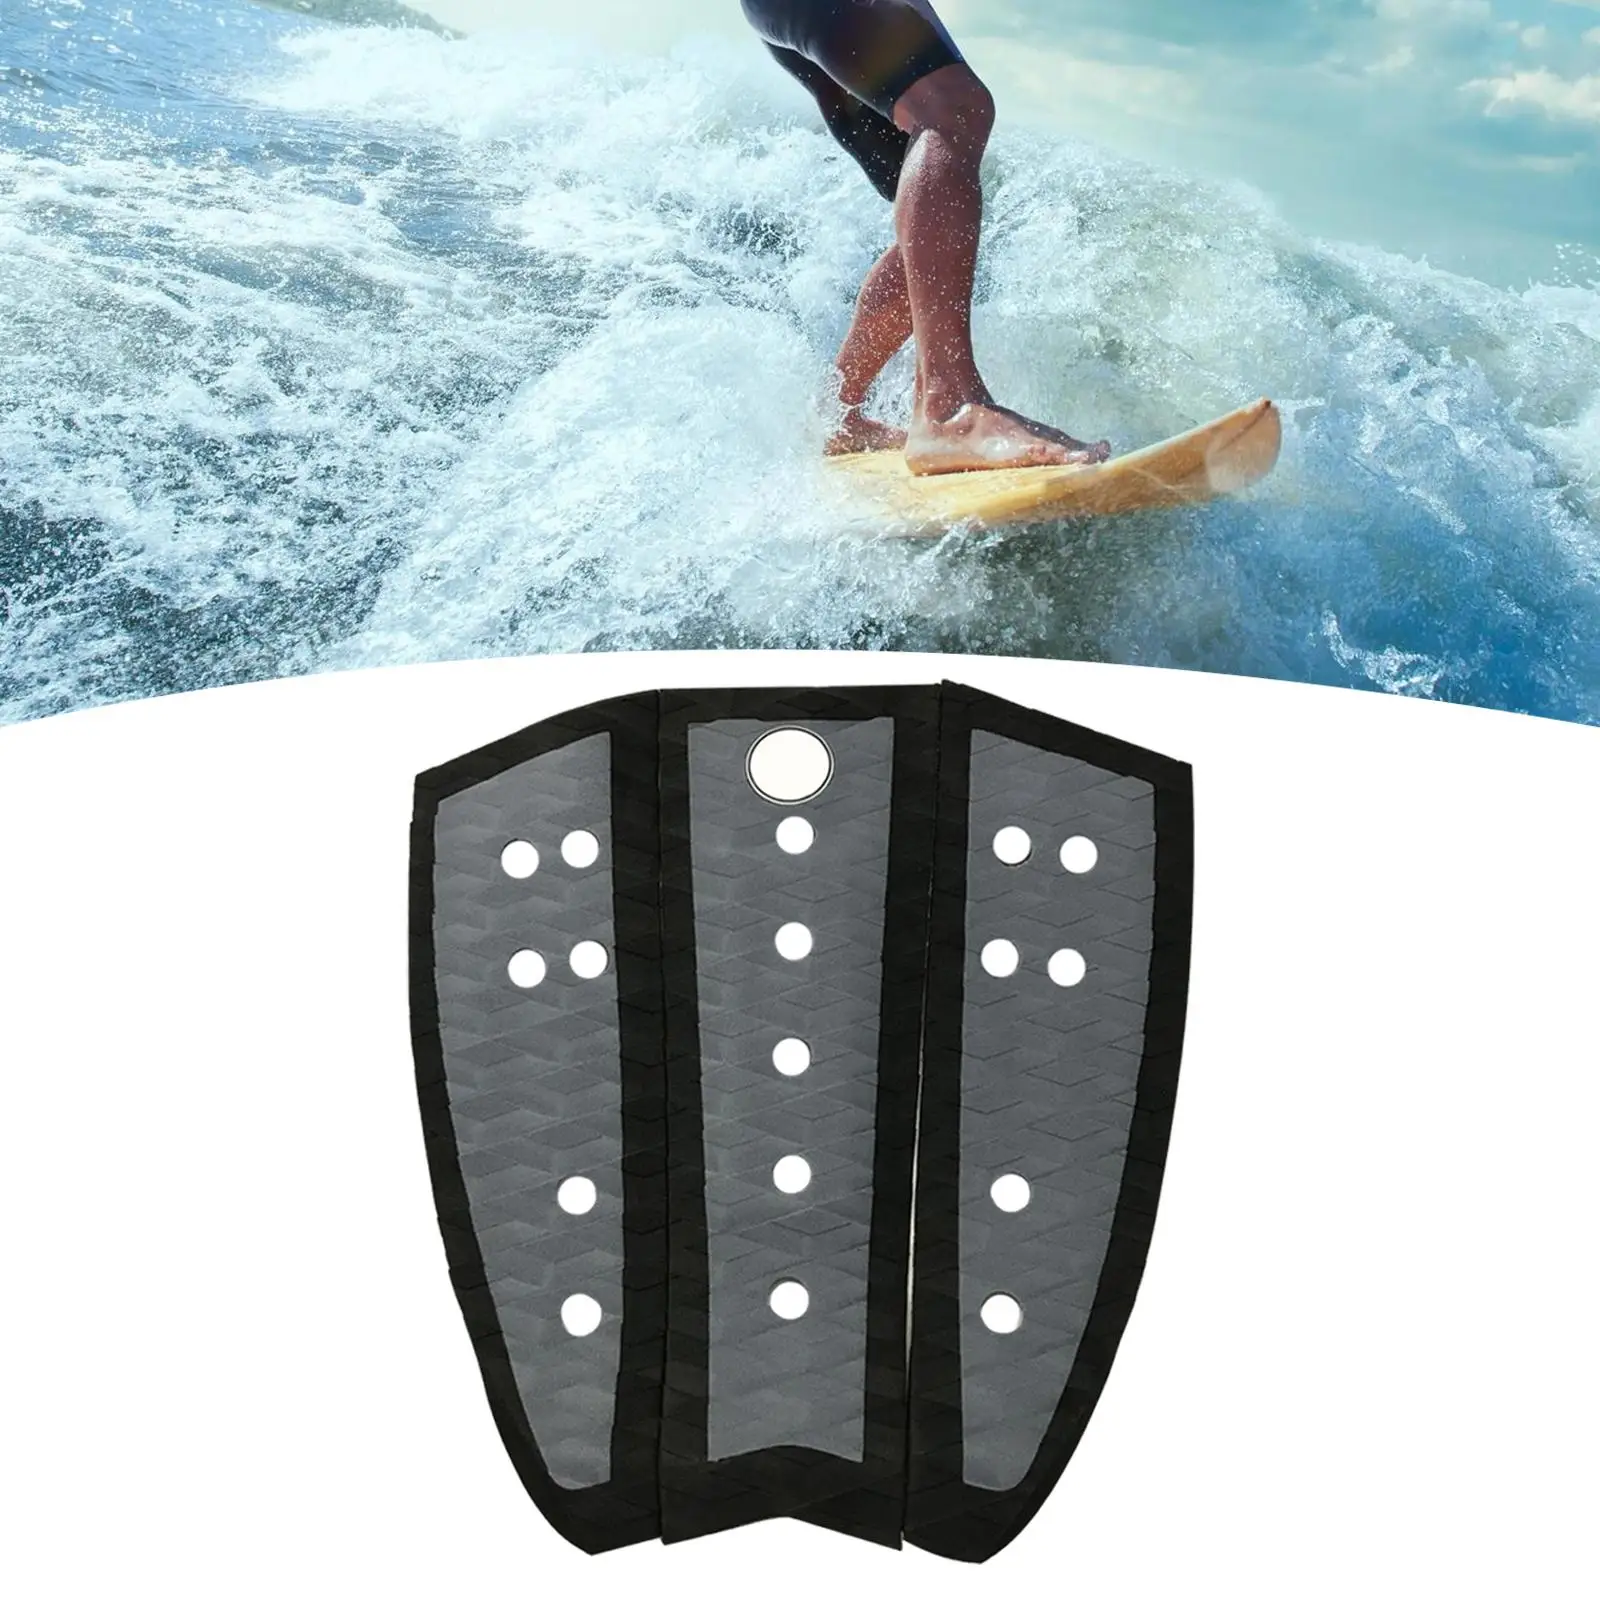 3Pcs EVA Surfboard Traction Pad Surfing Padding Deck Pad Mat Professional for